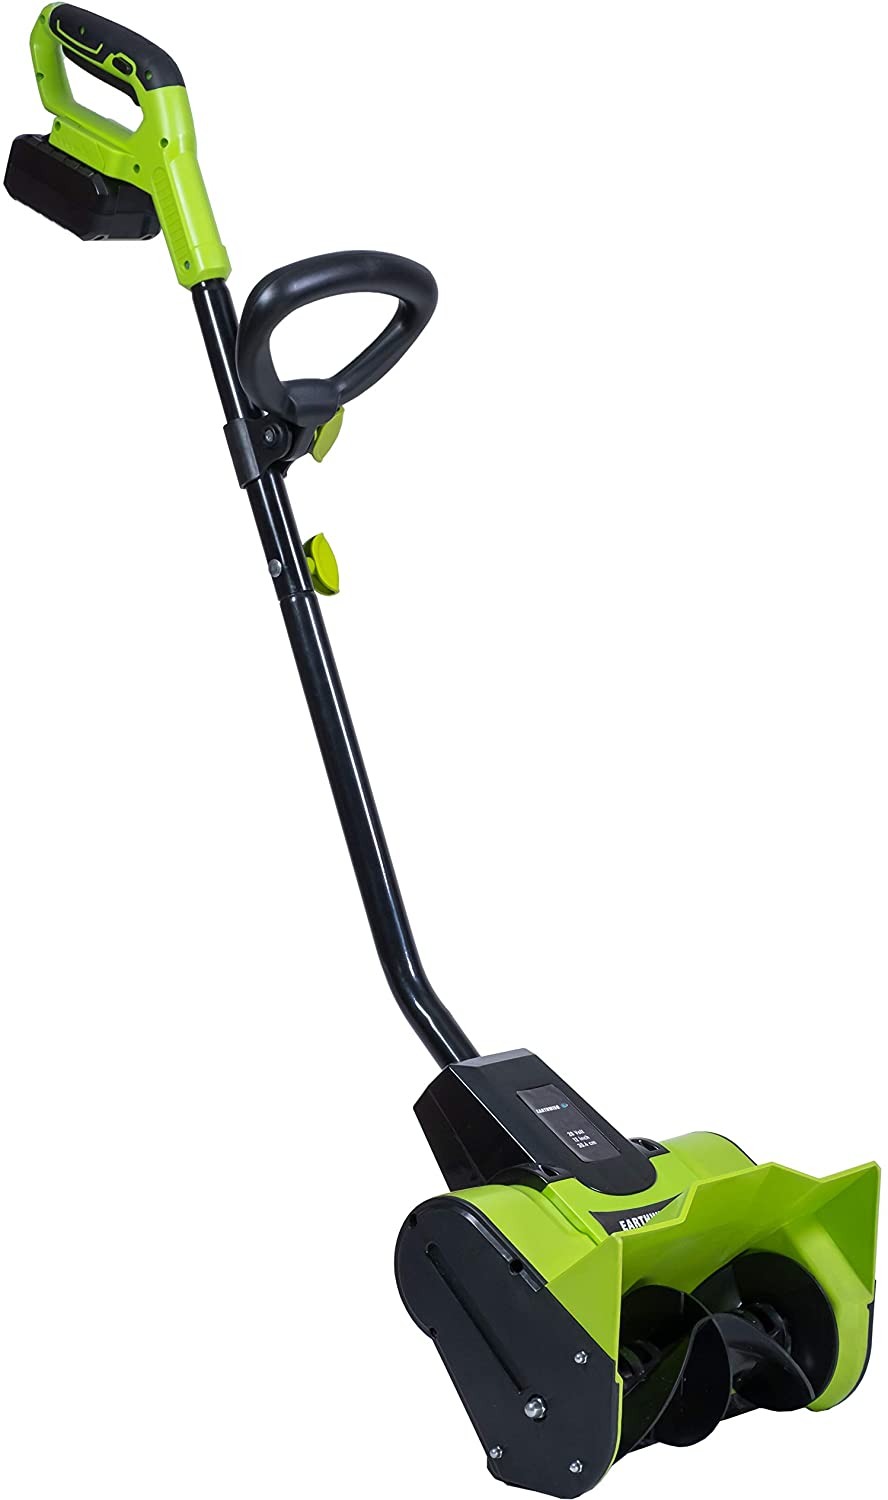 Earthwise Power Tools by ALM 12 20V 4Ah Snow Thrower – American Lawn Mower  Co. EST 1895